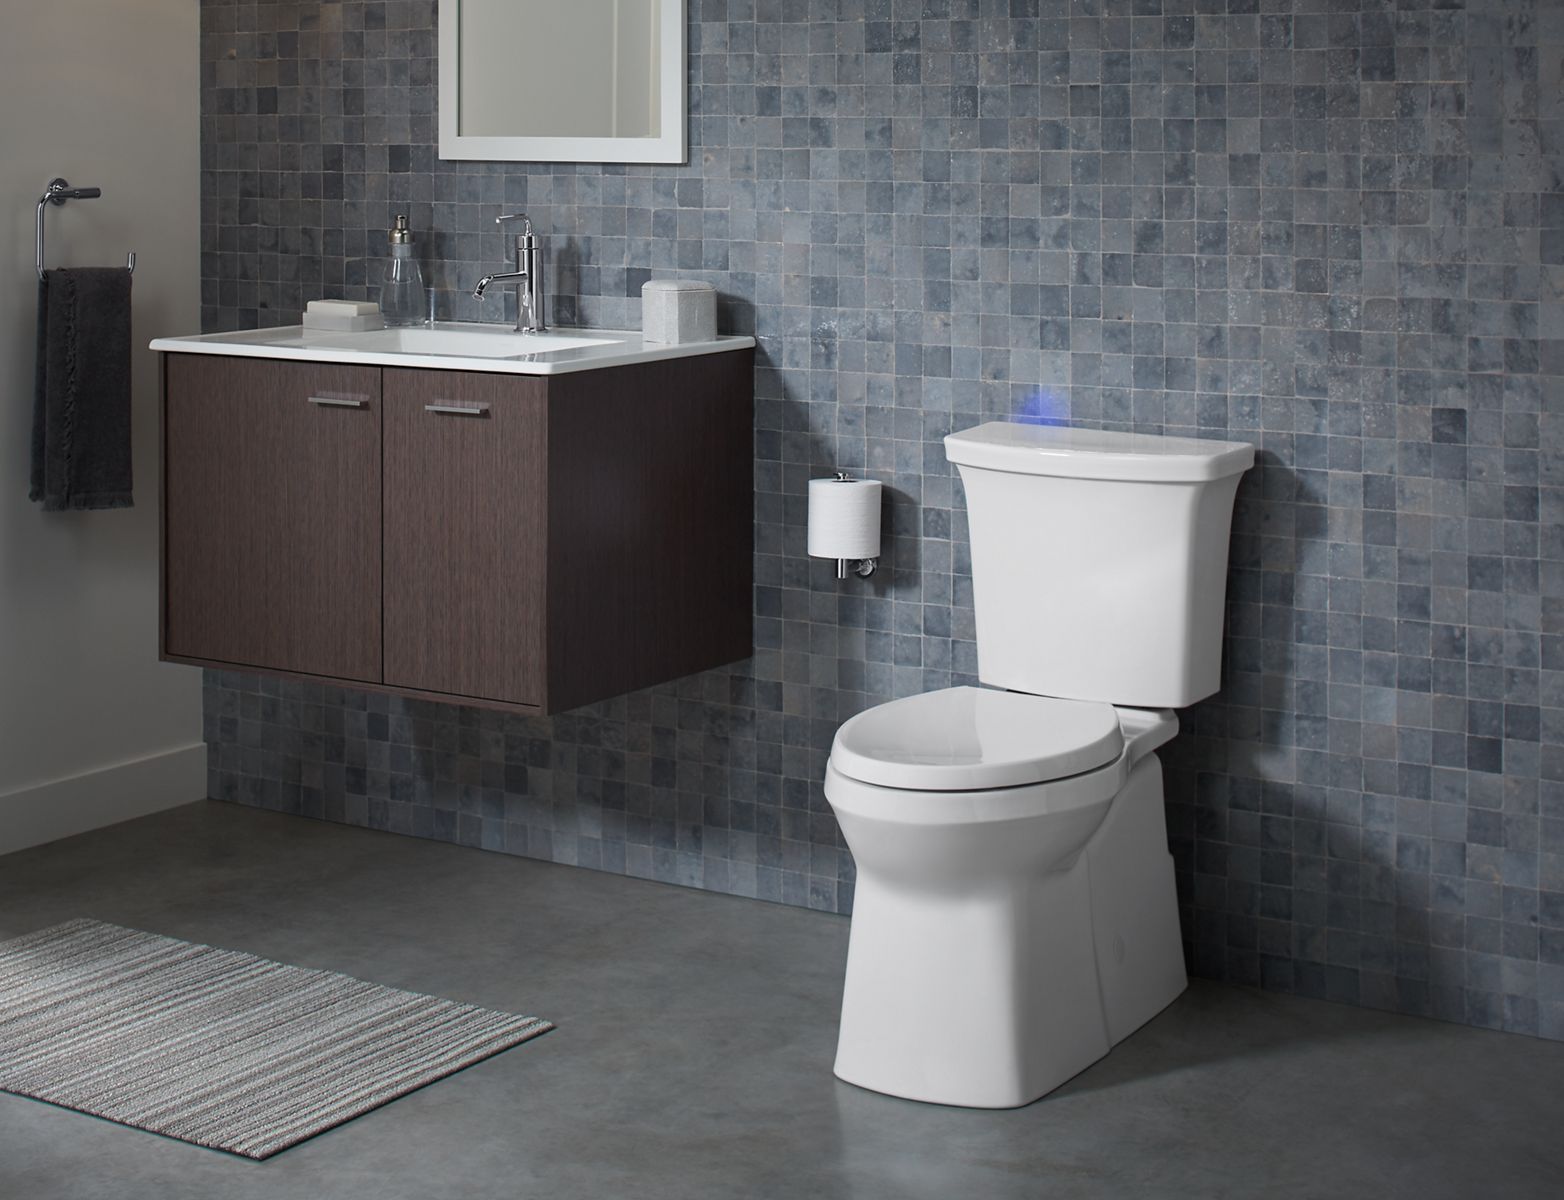 Self Cleaning Toilet Technology | ContinuousClean | KOHLER